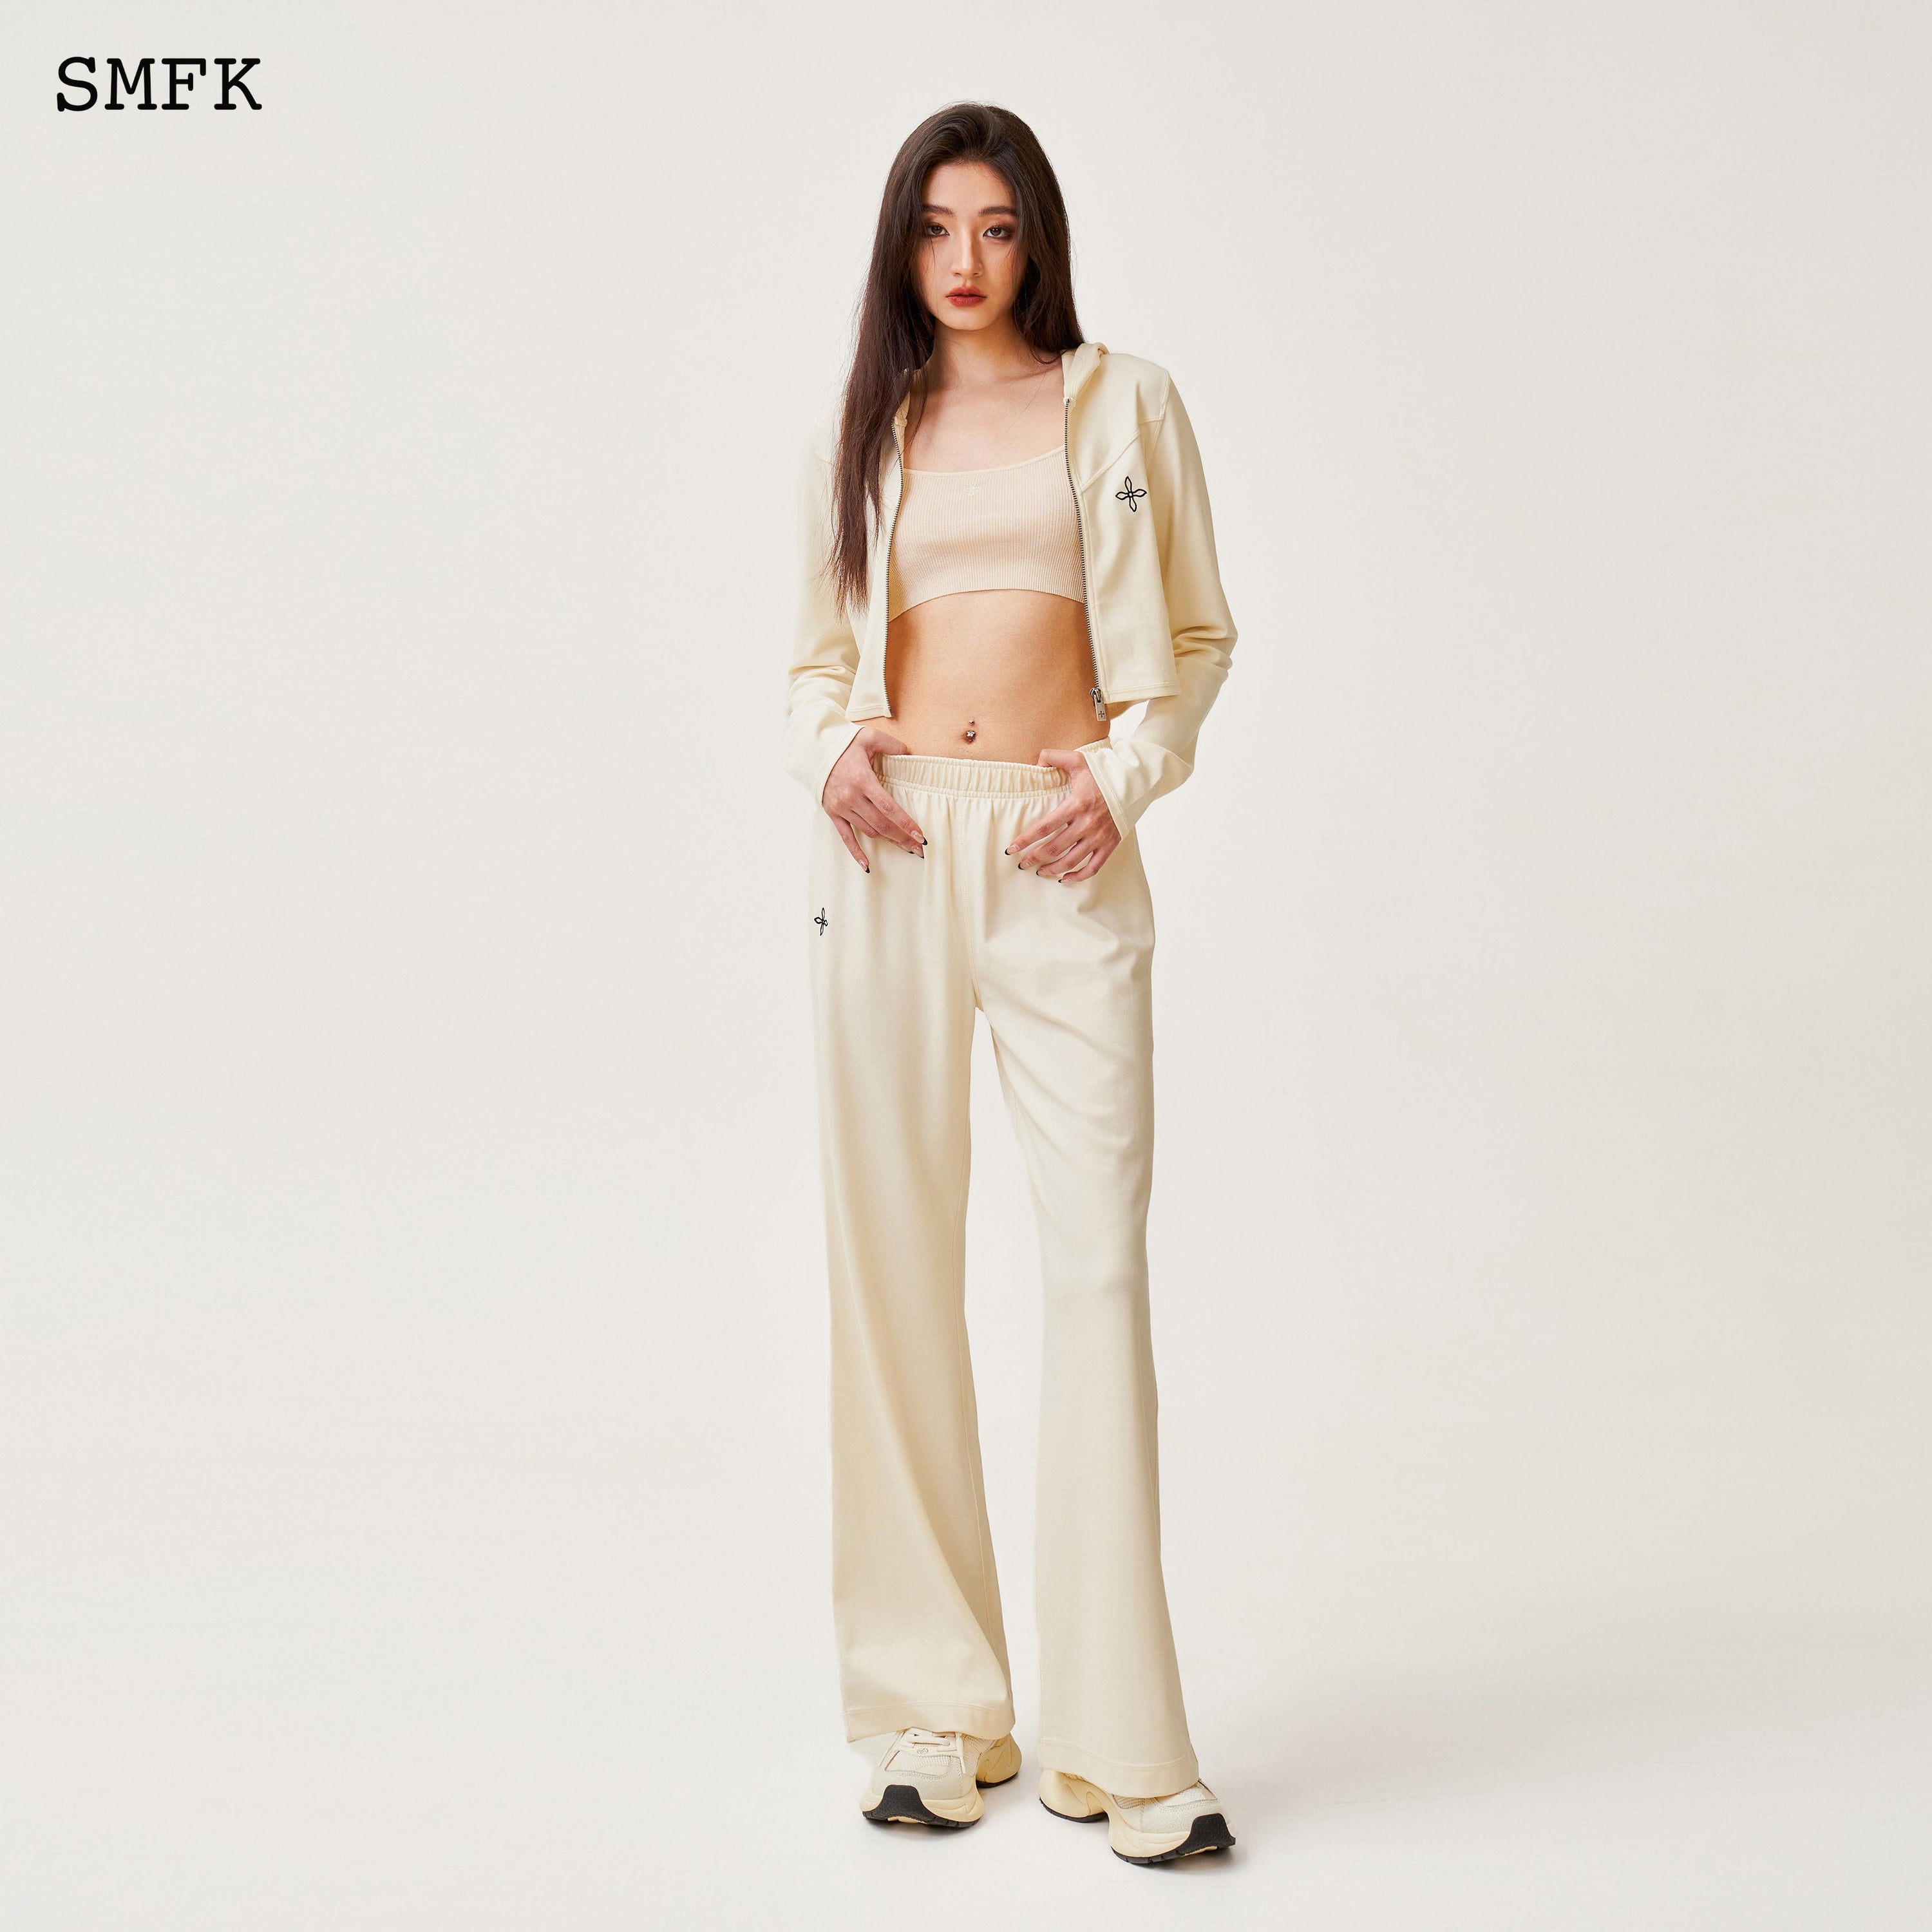 Compass Cross Classic Flared Sweatpants White - SMFK Official